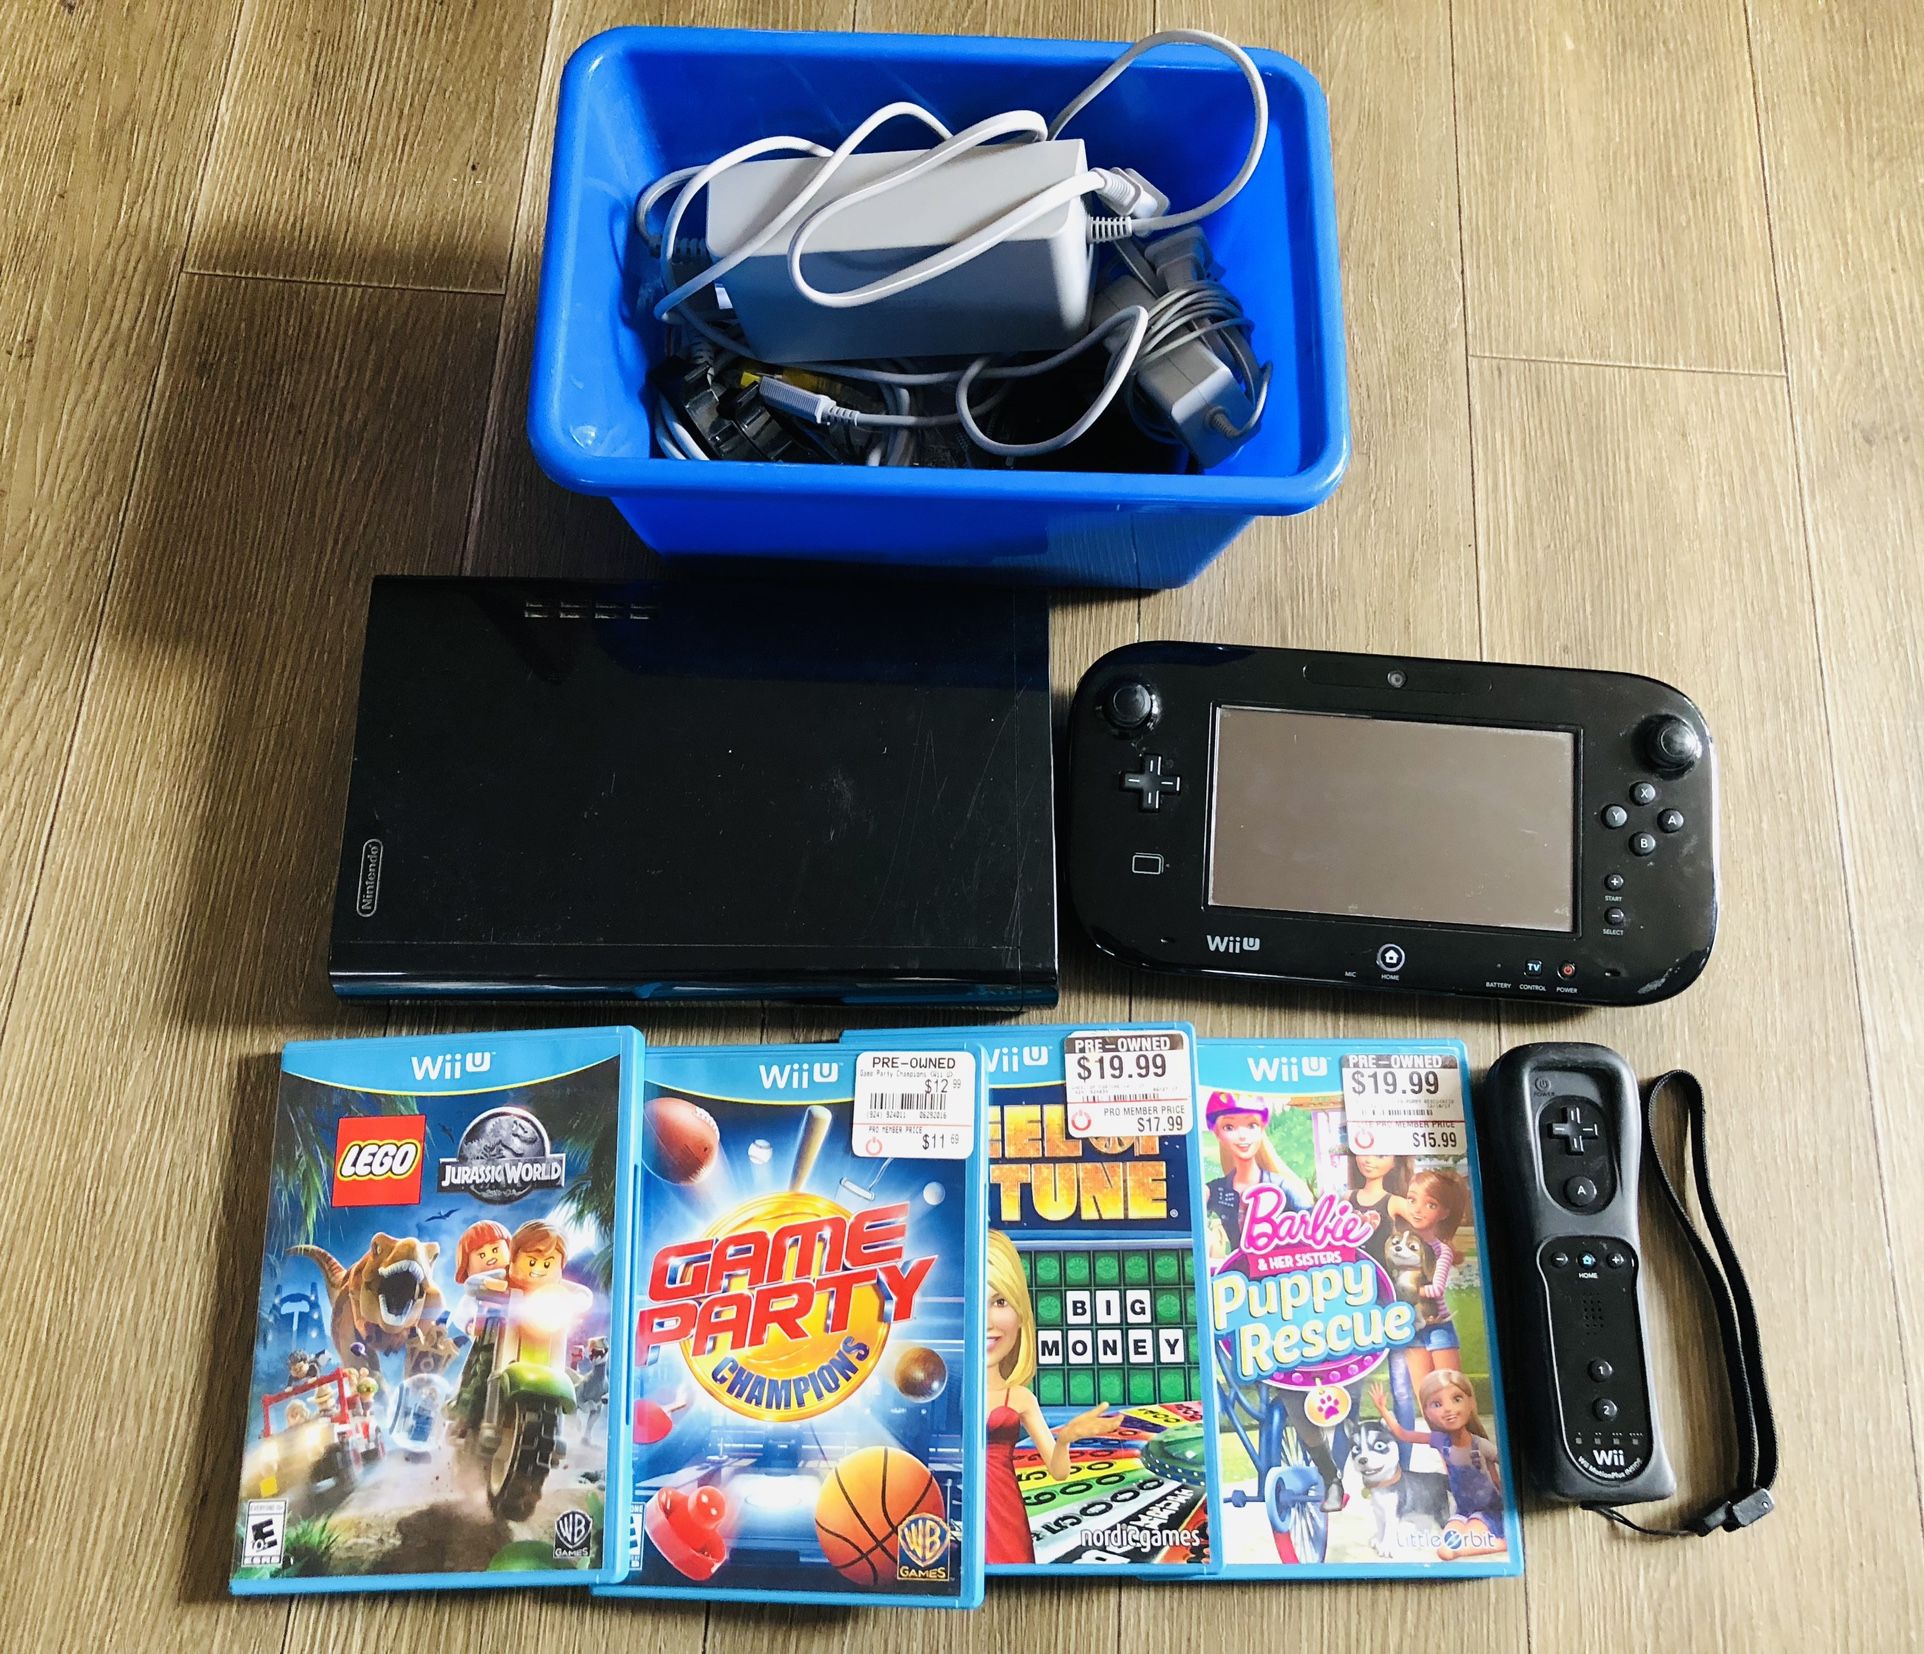 Nintendo Wii U Gaming System 32GB Console + Gamepad, with Games